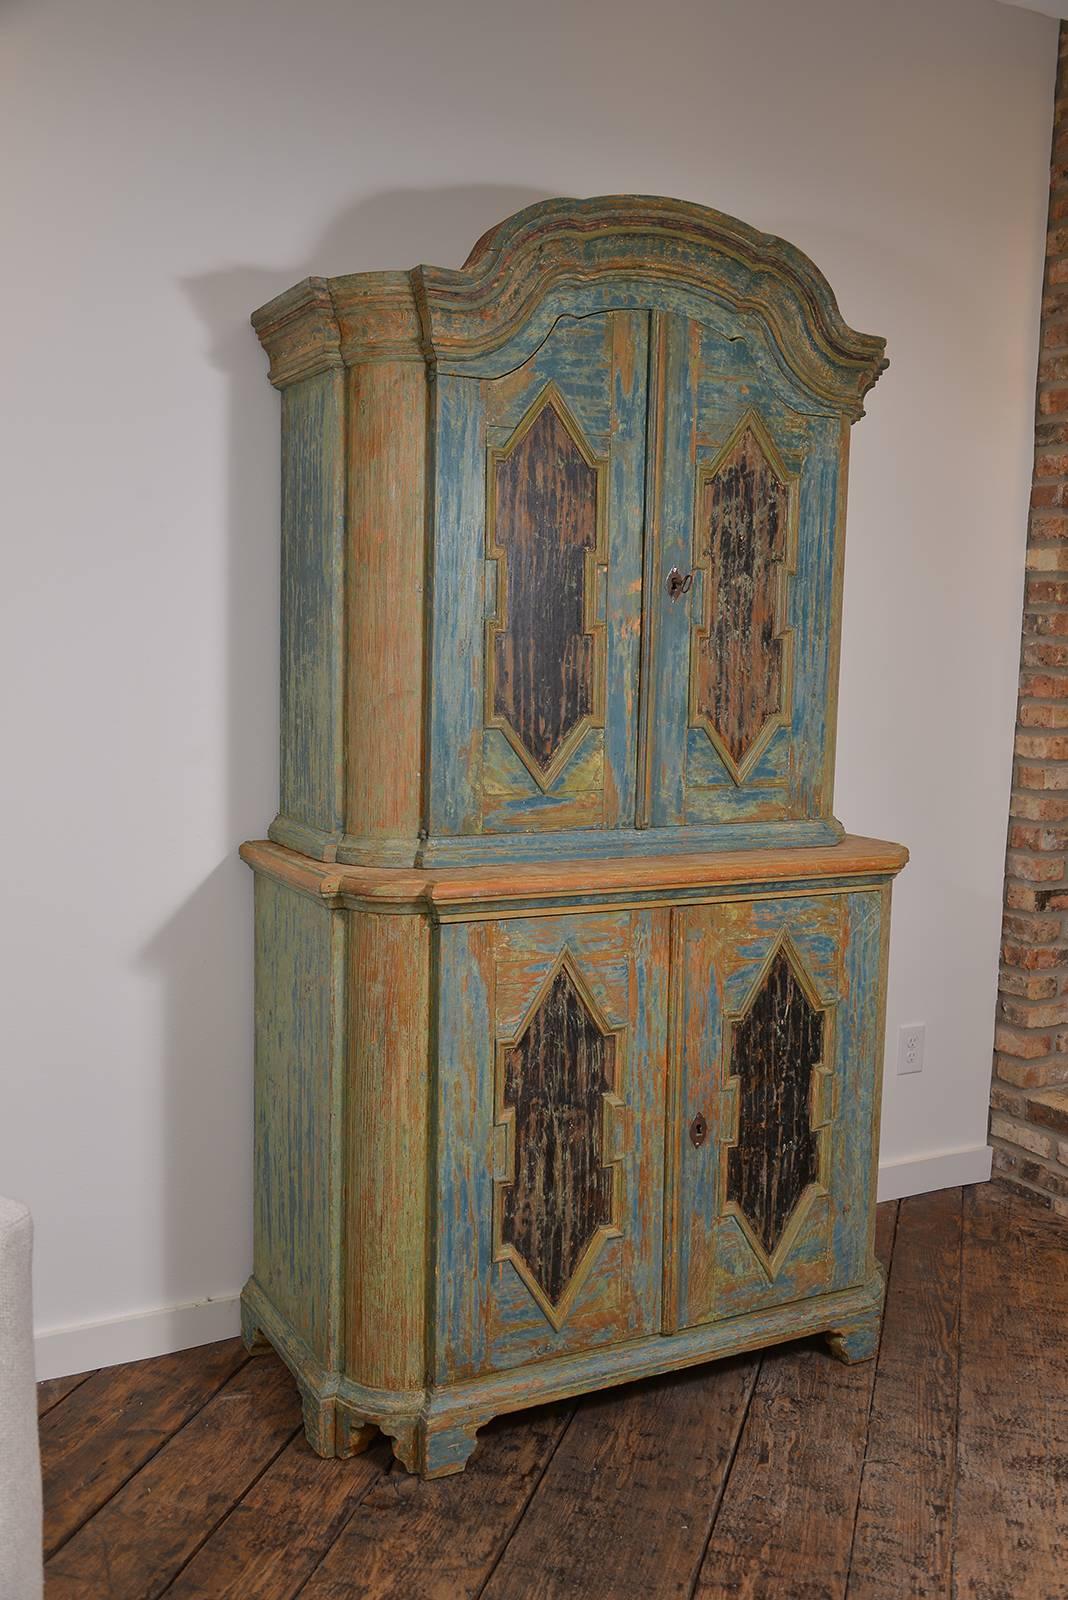 Handsome Swedish Rococo cabinet in original paint, a true beauty.